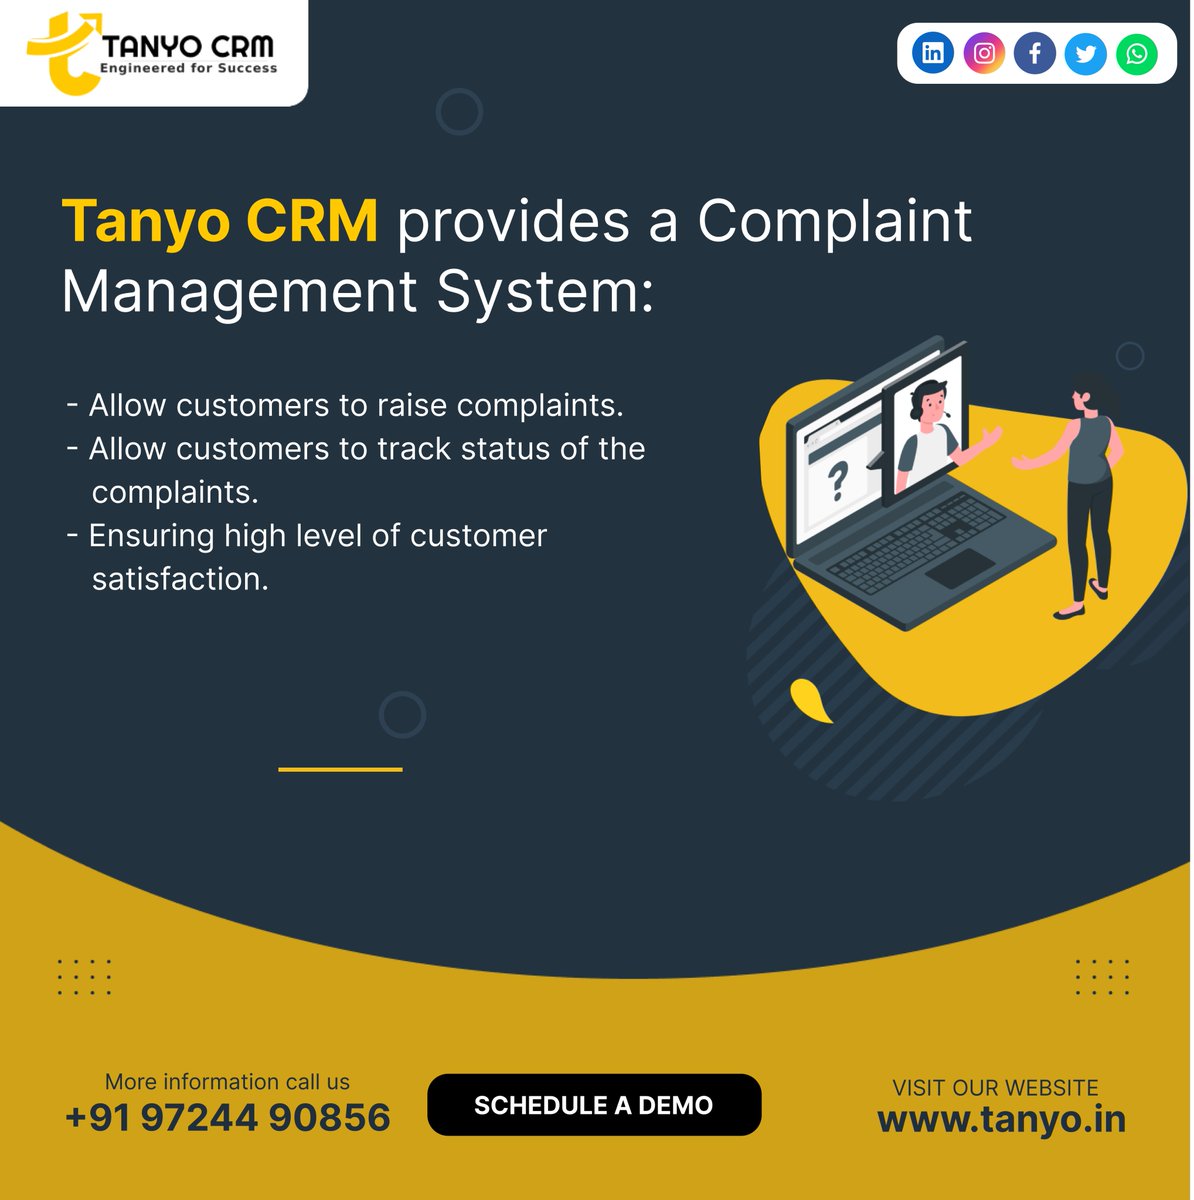 Tanyo provides a Complaint Management System!

So, what are you waiting for? DM or call us to book a free demo!

📞 +91 97244 90856 
📧 hello@tanyo.in 
🌐 tanyo.in

#Tanyo #ComplaintManagement #ComplaintTracking #ComplaintResolution #BusinessGrowth